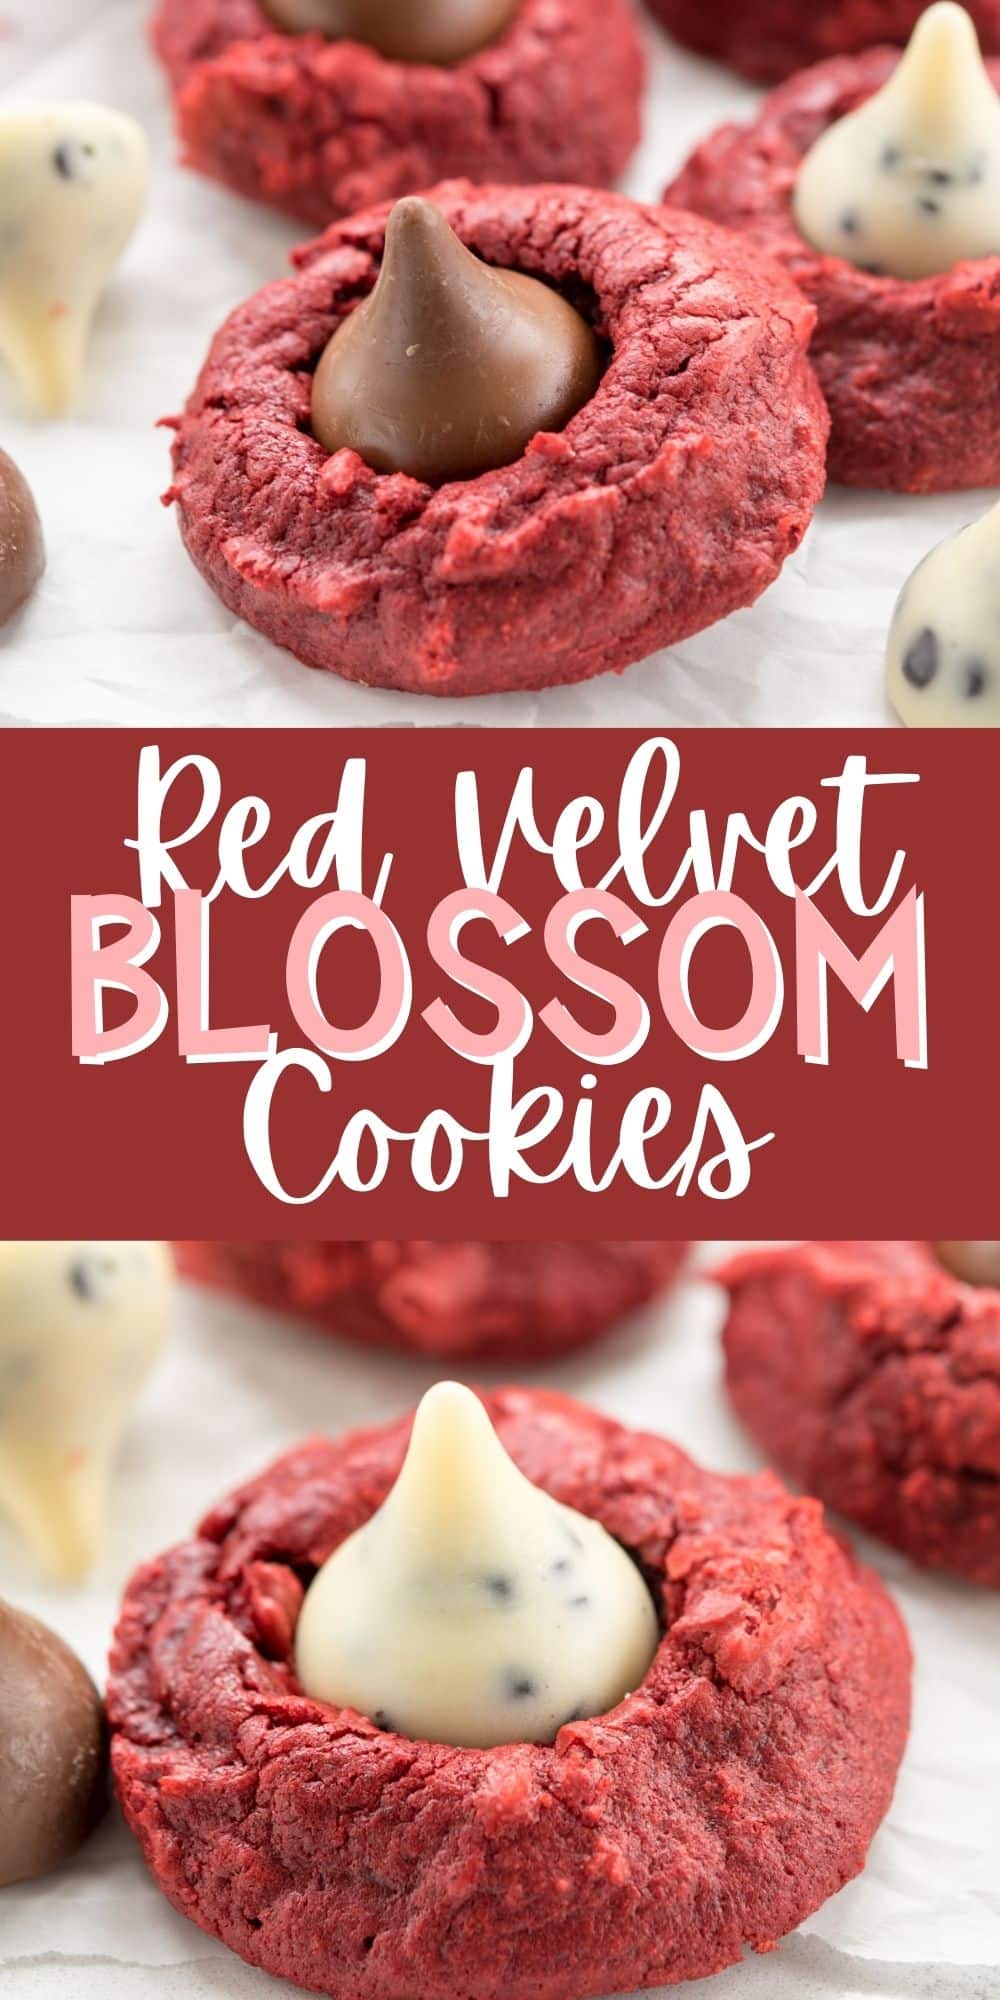 two photos of red velvet cookie with chocolate kiss inside with words on the image